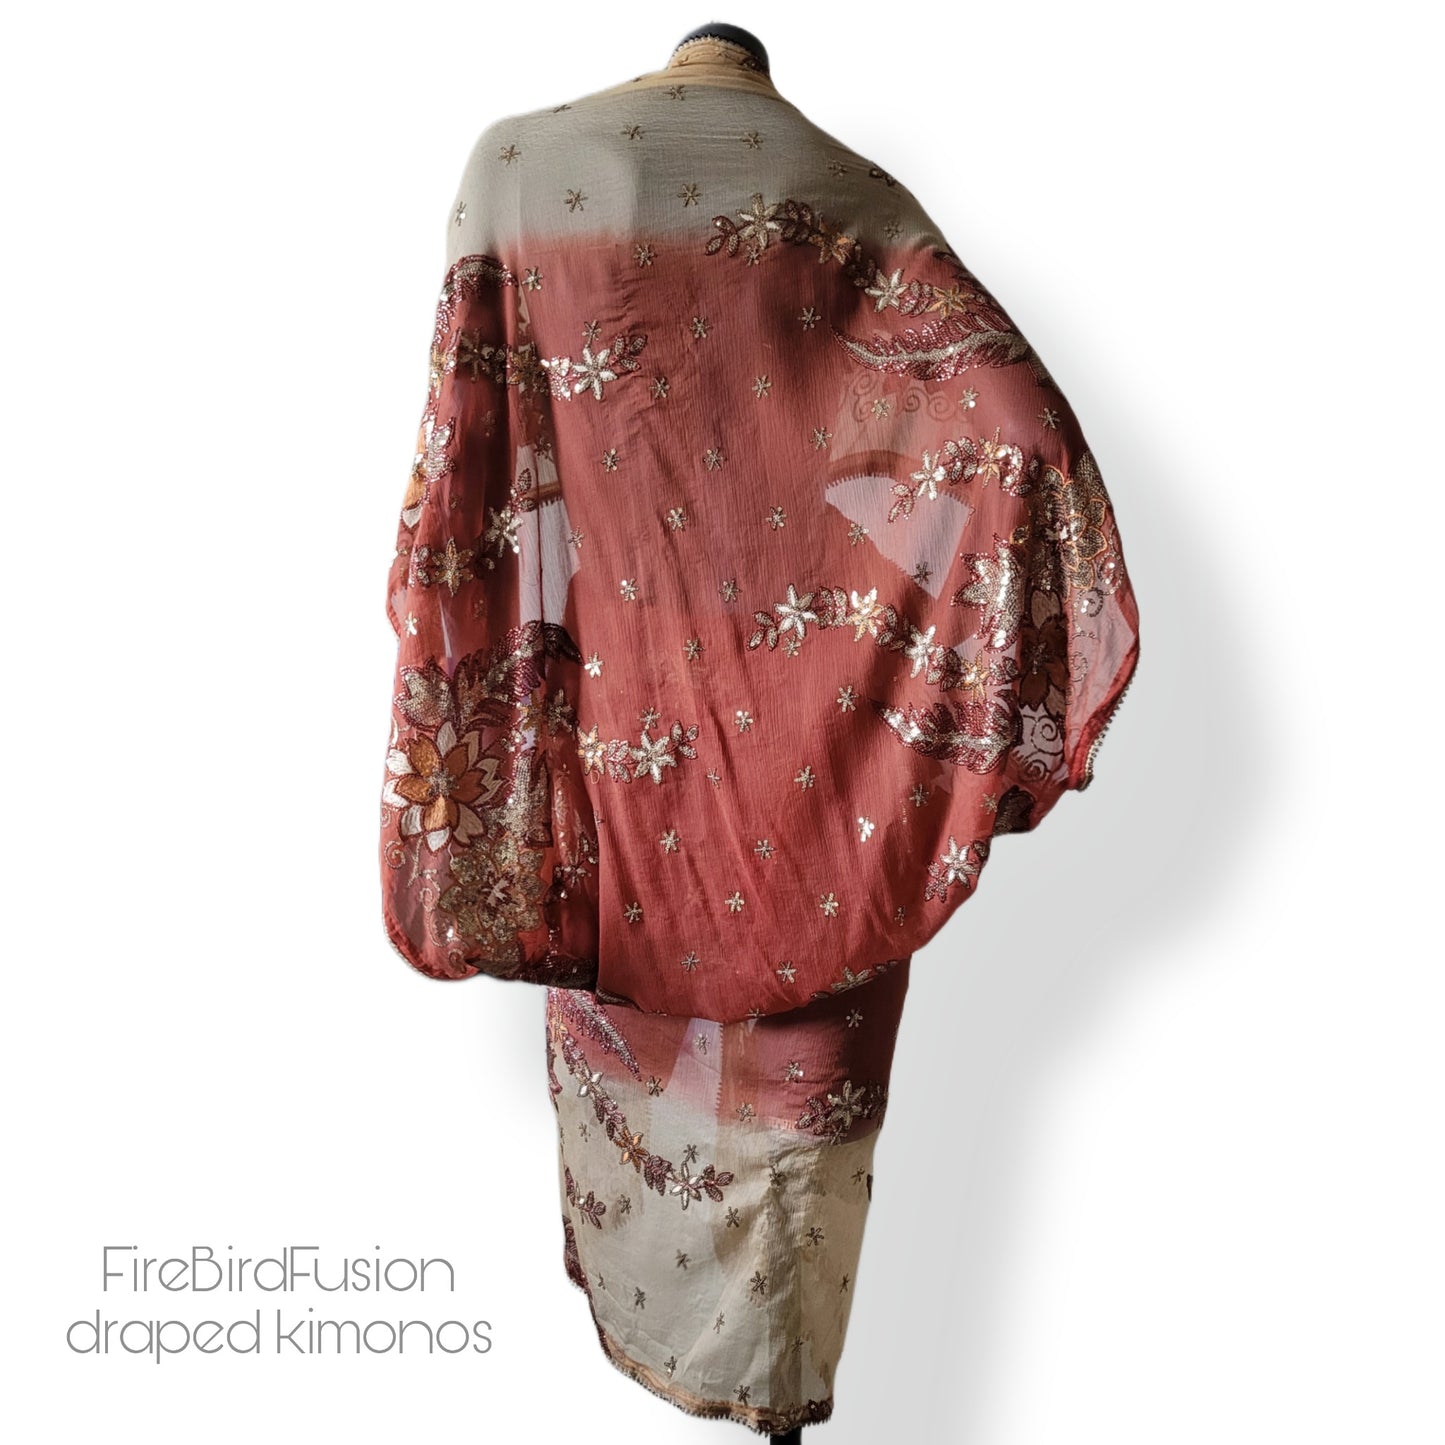 Draped kimono, dark caffe latte and light rust with elaborated embrodery in antique gold sequins and shades of brown (M)